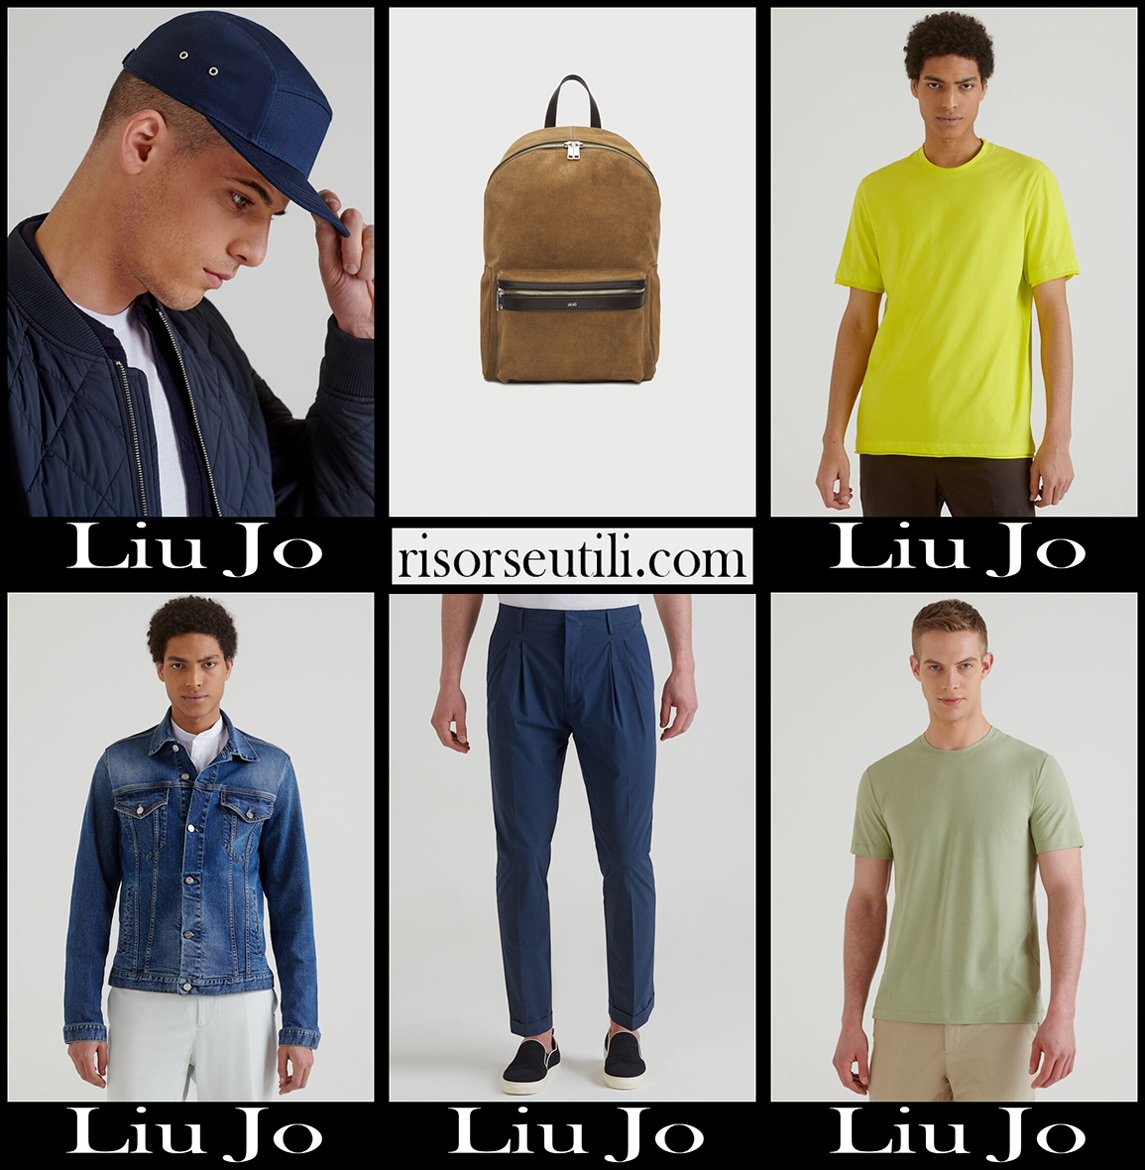 New arrivals Liu Jo 2021 mens clothing collection look